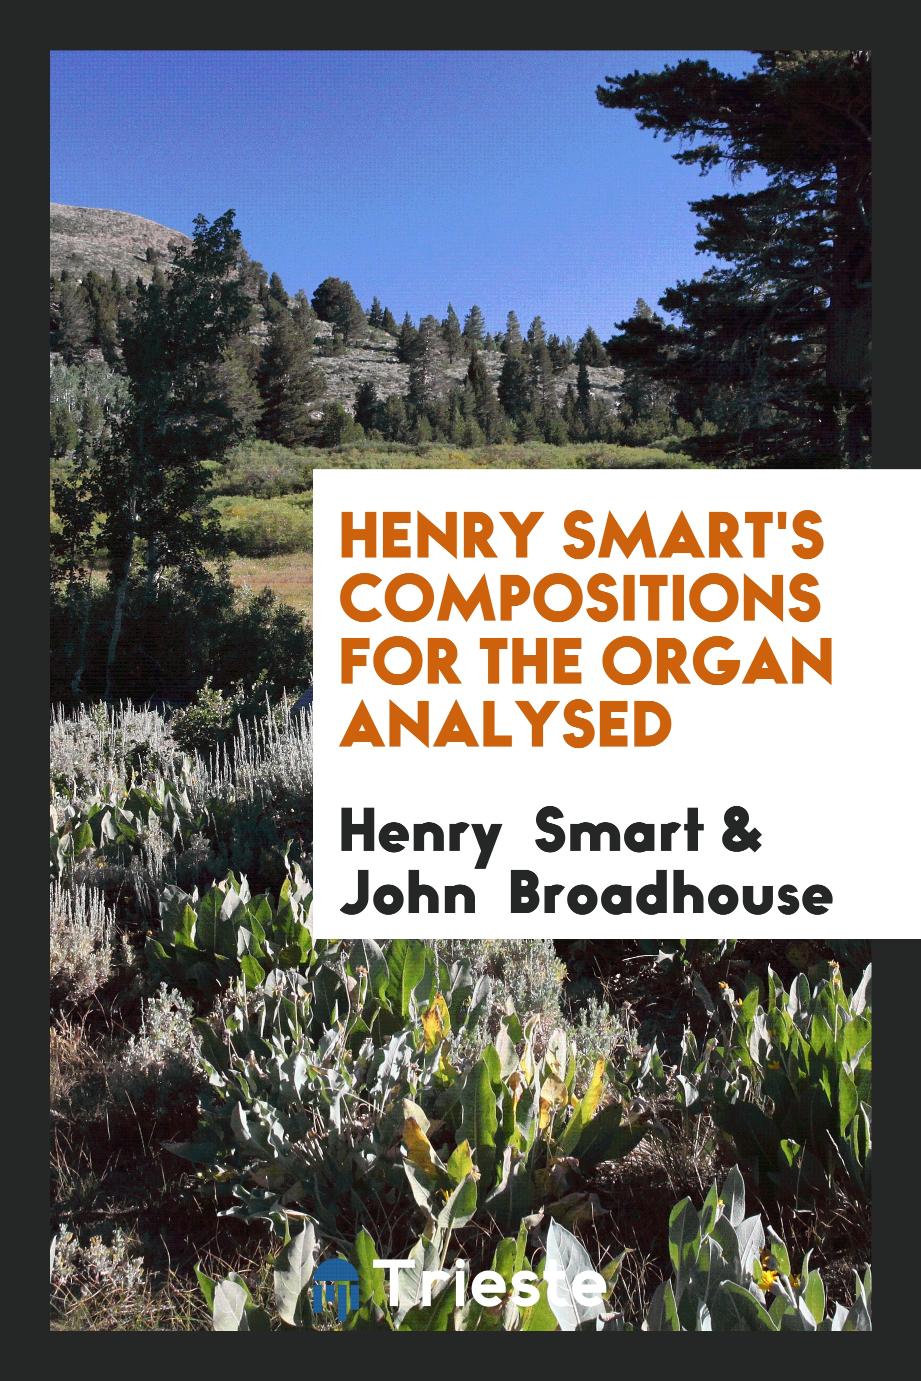 Henry Smart's compositions for the organ analysed